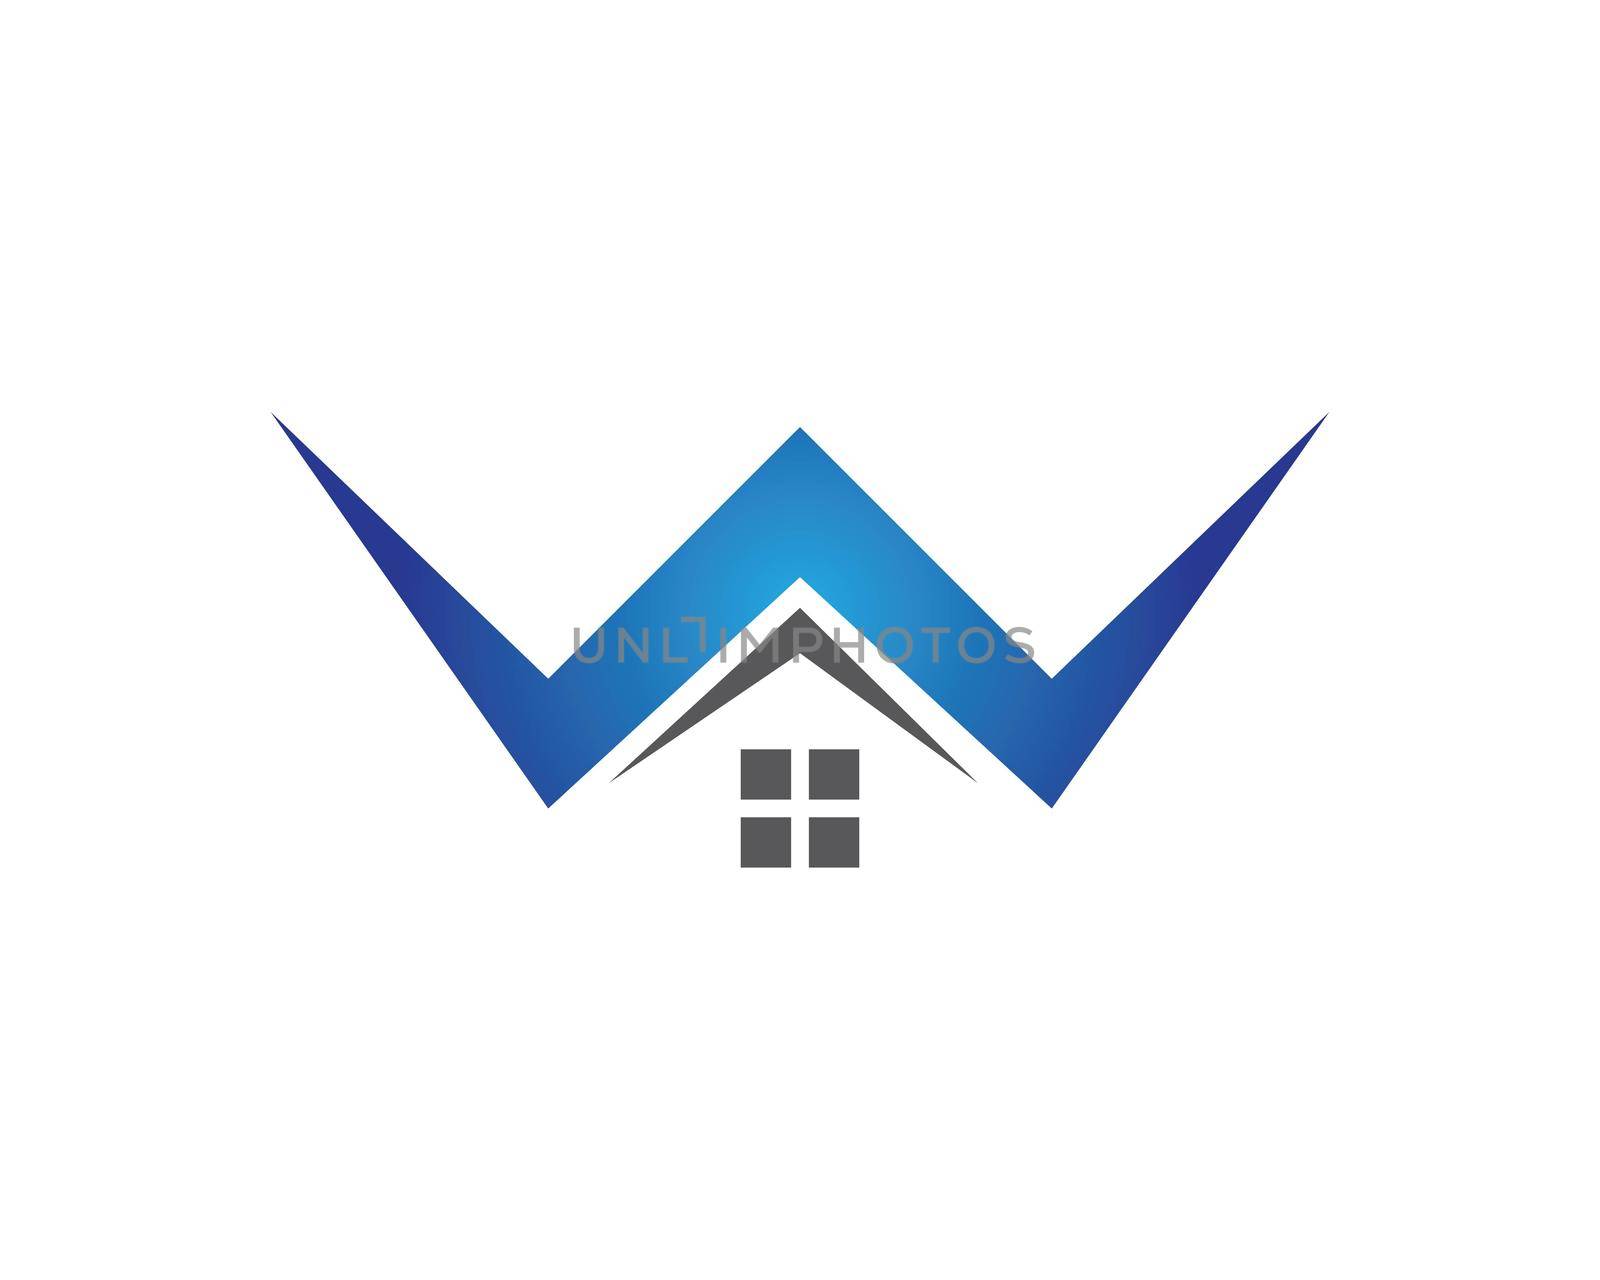 Property and Construction Logo design by awk